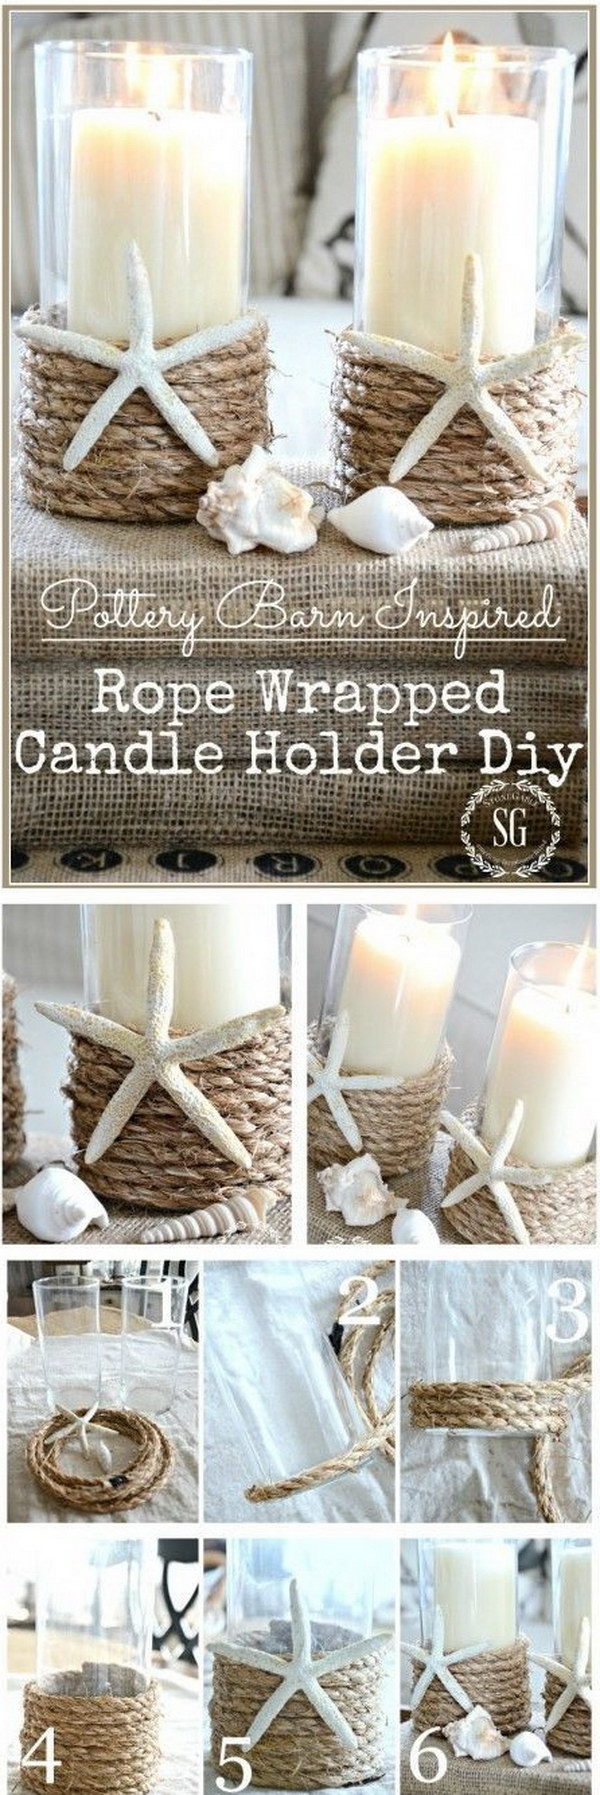 DIY Rope Wrapped Candle Holder 